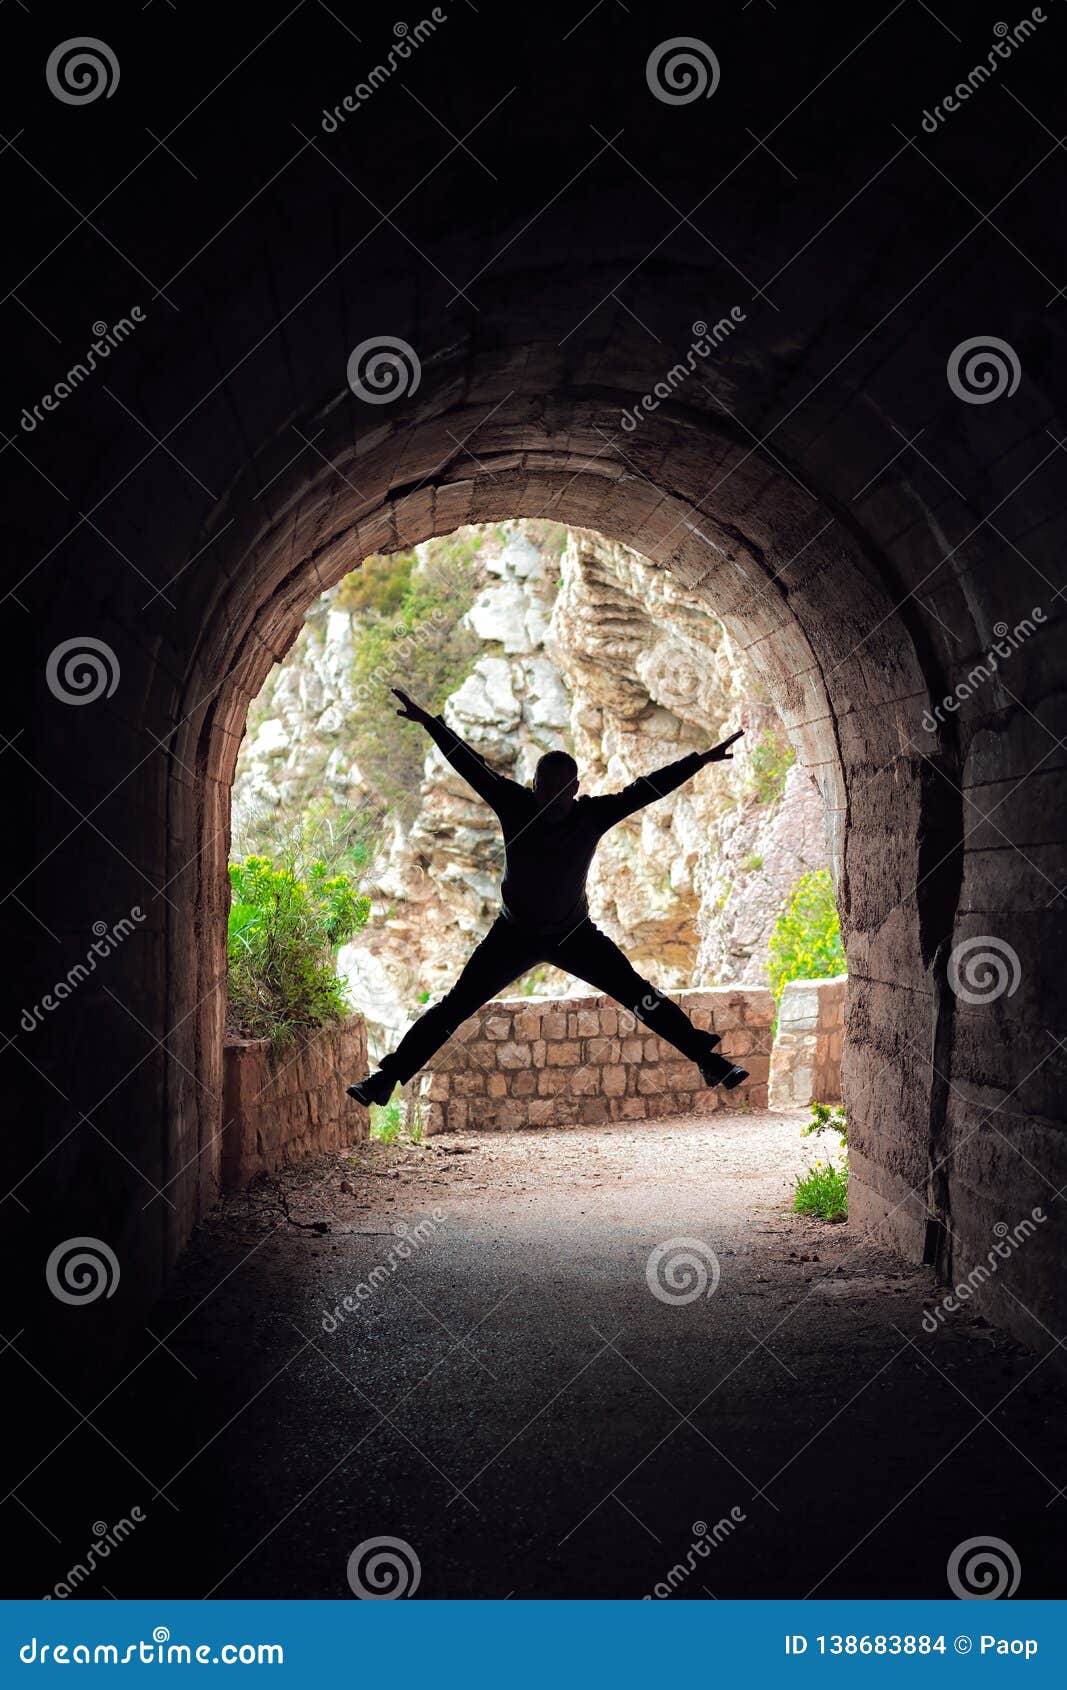 Man Jumping In A Dark Tunnel Stock Photo - Image of dark, cove: 138683884 Silhouette Man Walking Tunnel